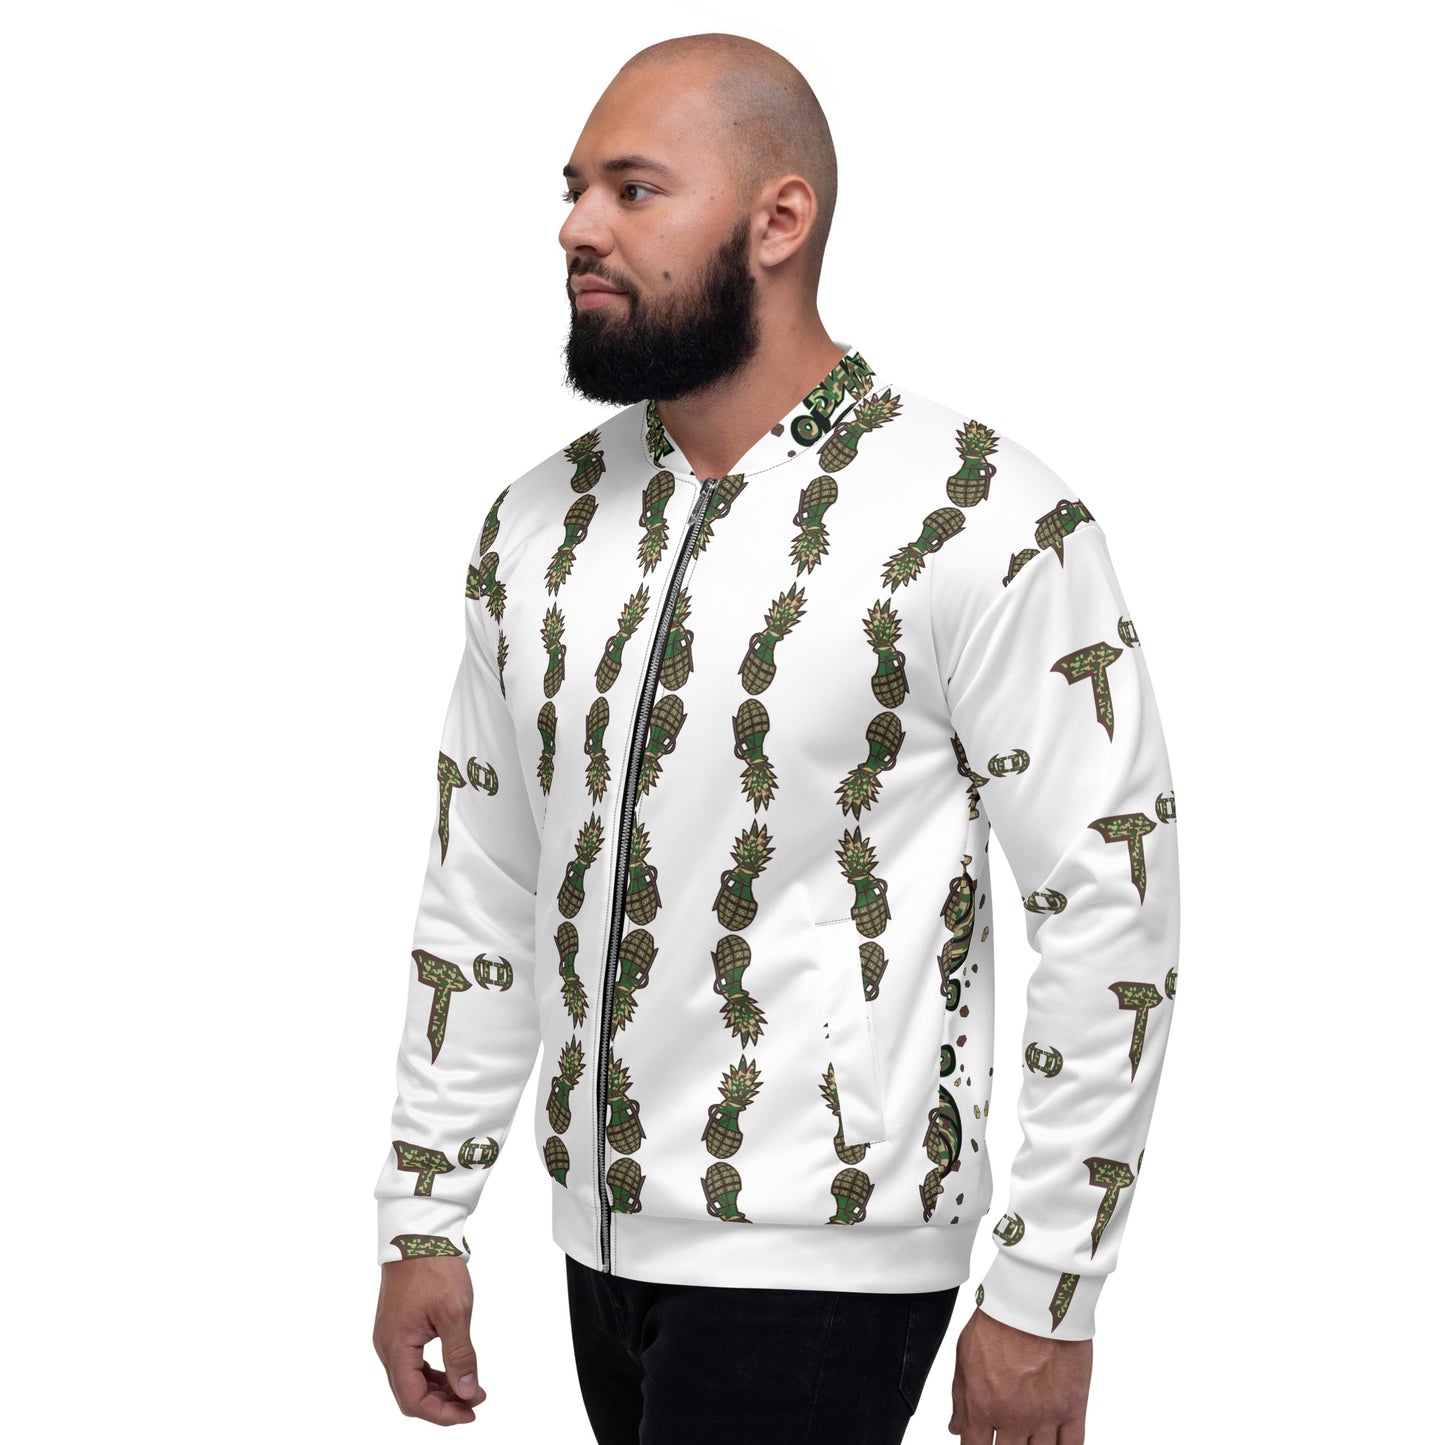 Unisex Bomber Jacket "Digi The Pineapple Grenade" Can't See Me Edition